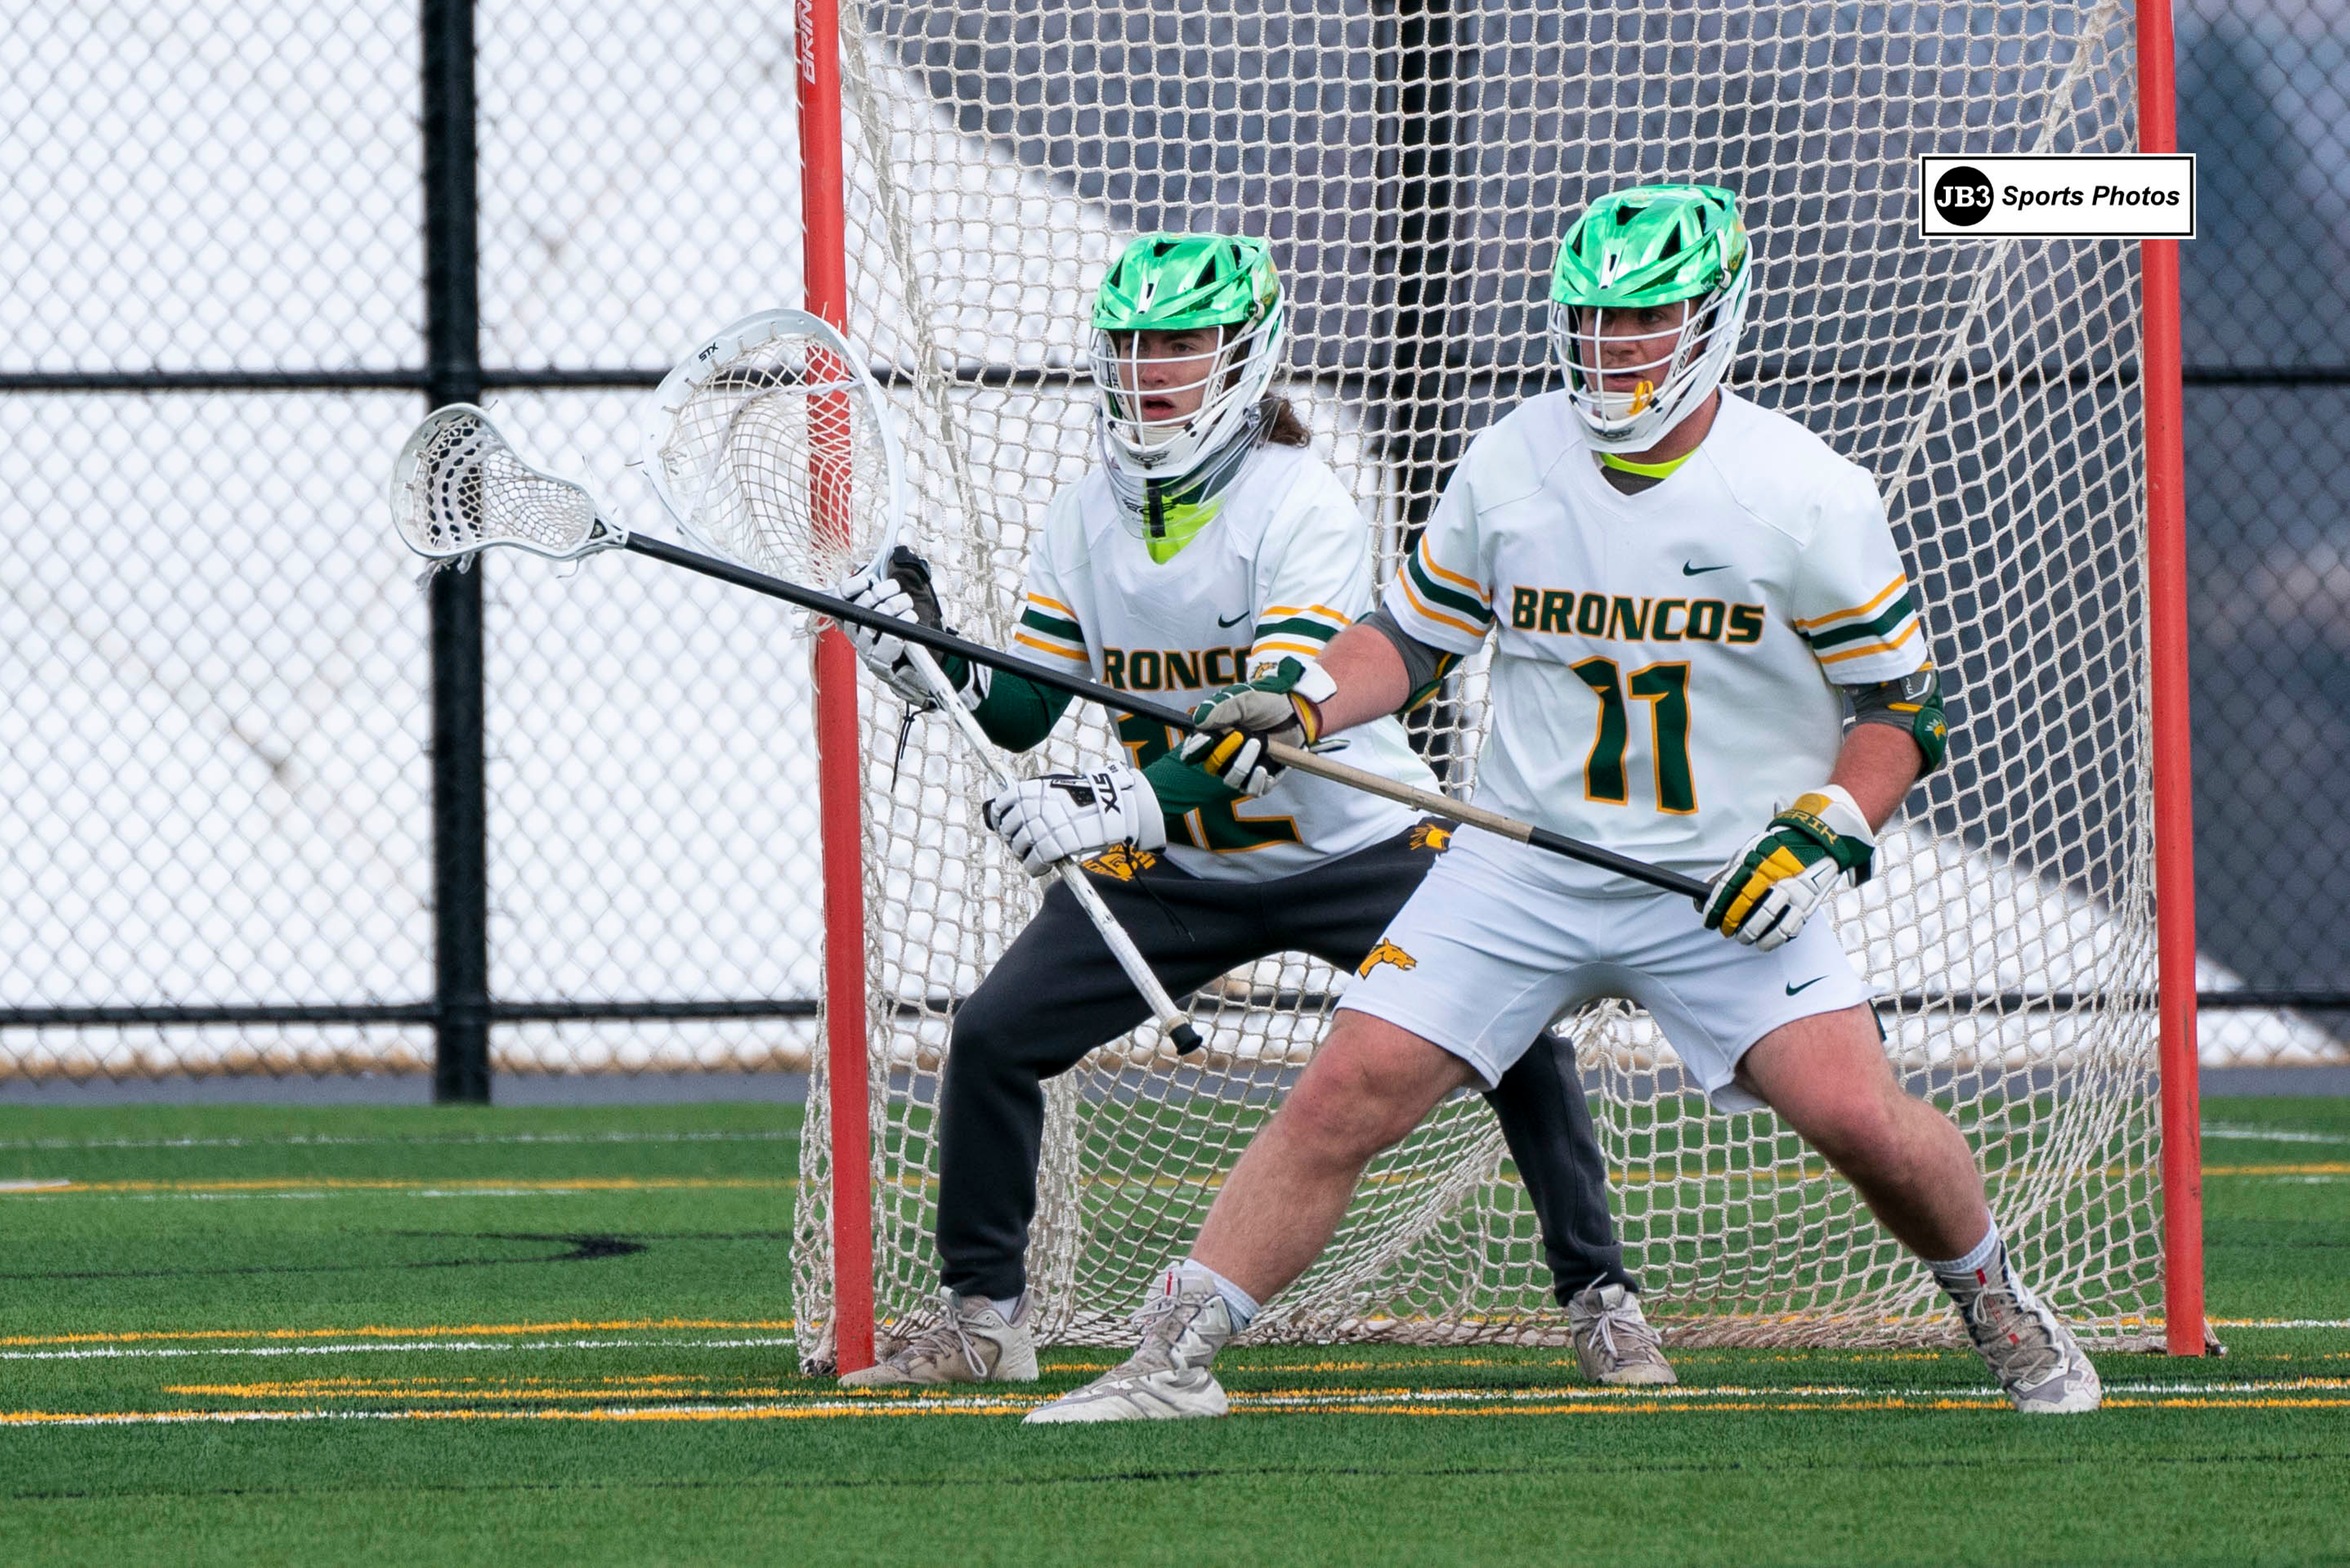 Men’s Lacrosse falls to Morrisville State 8-5 in home opener